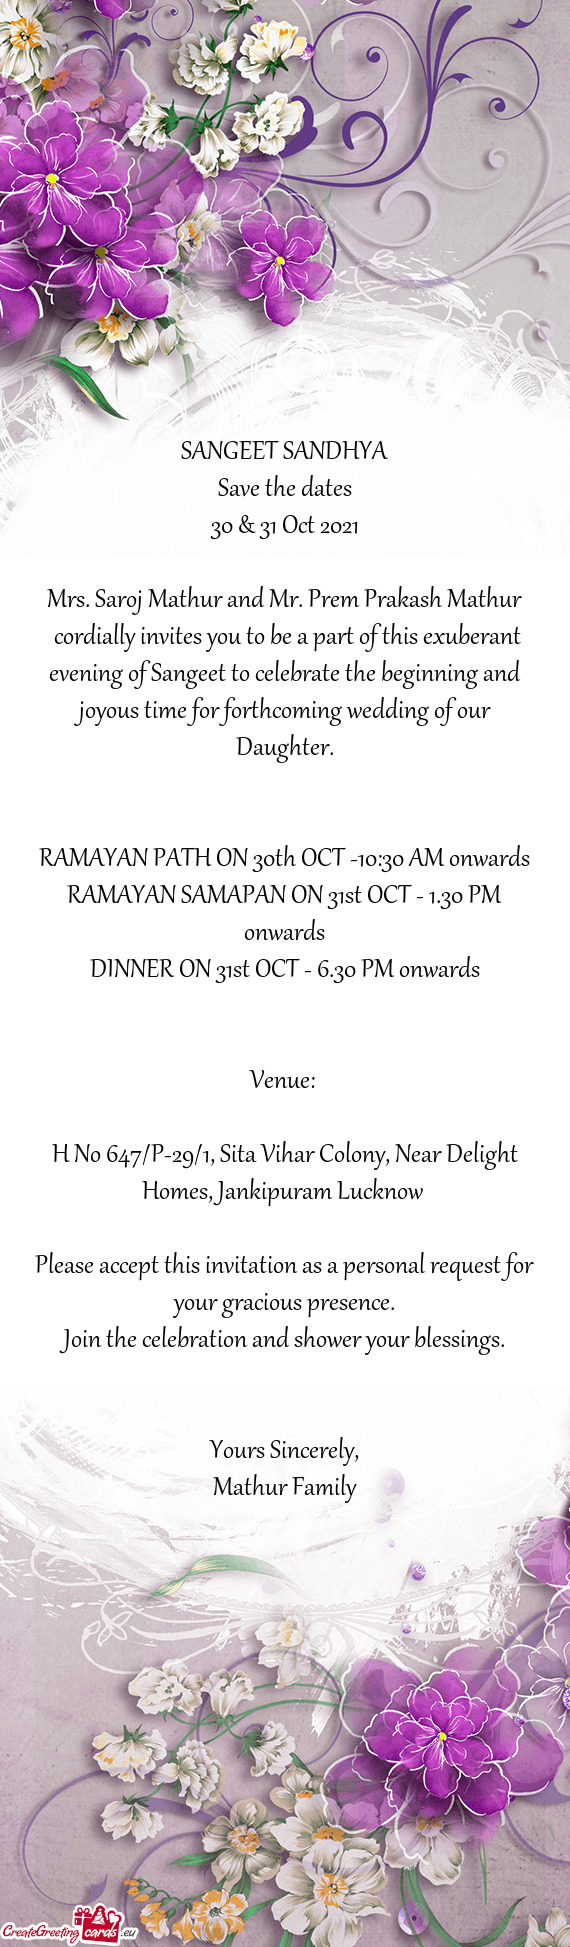 Cordially invites you to be a part of this exuberant evening of Sangeet to celebrate the beginning